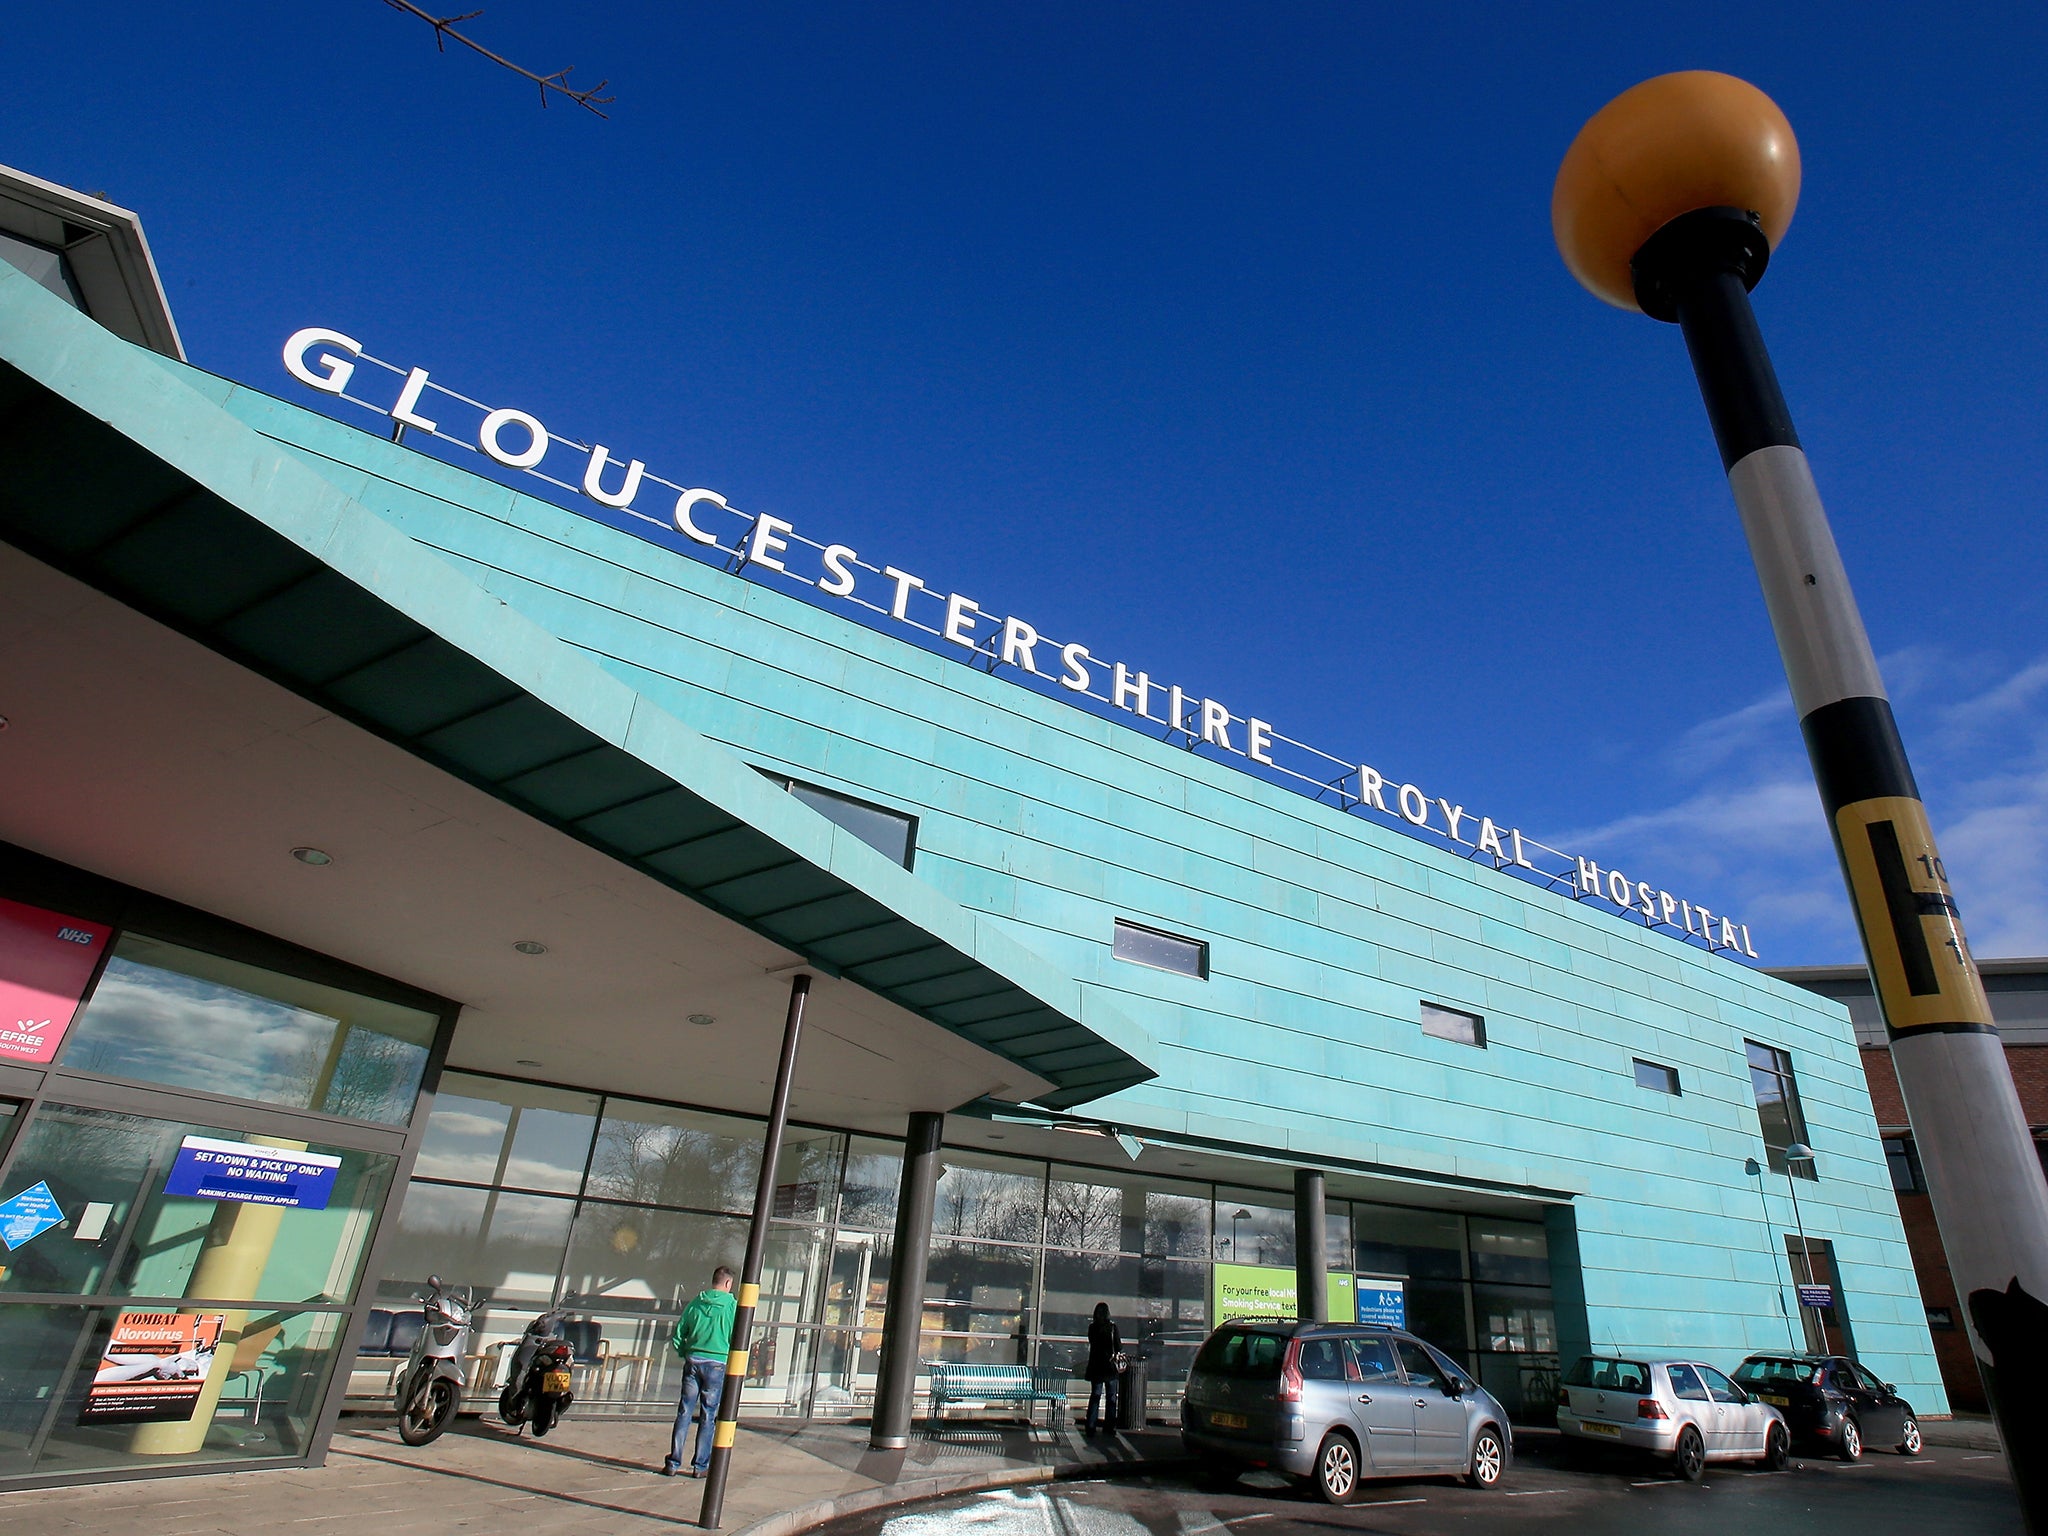 The Royal is one of two Gloucestershire hospitals to have declared a major incident (Getty)